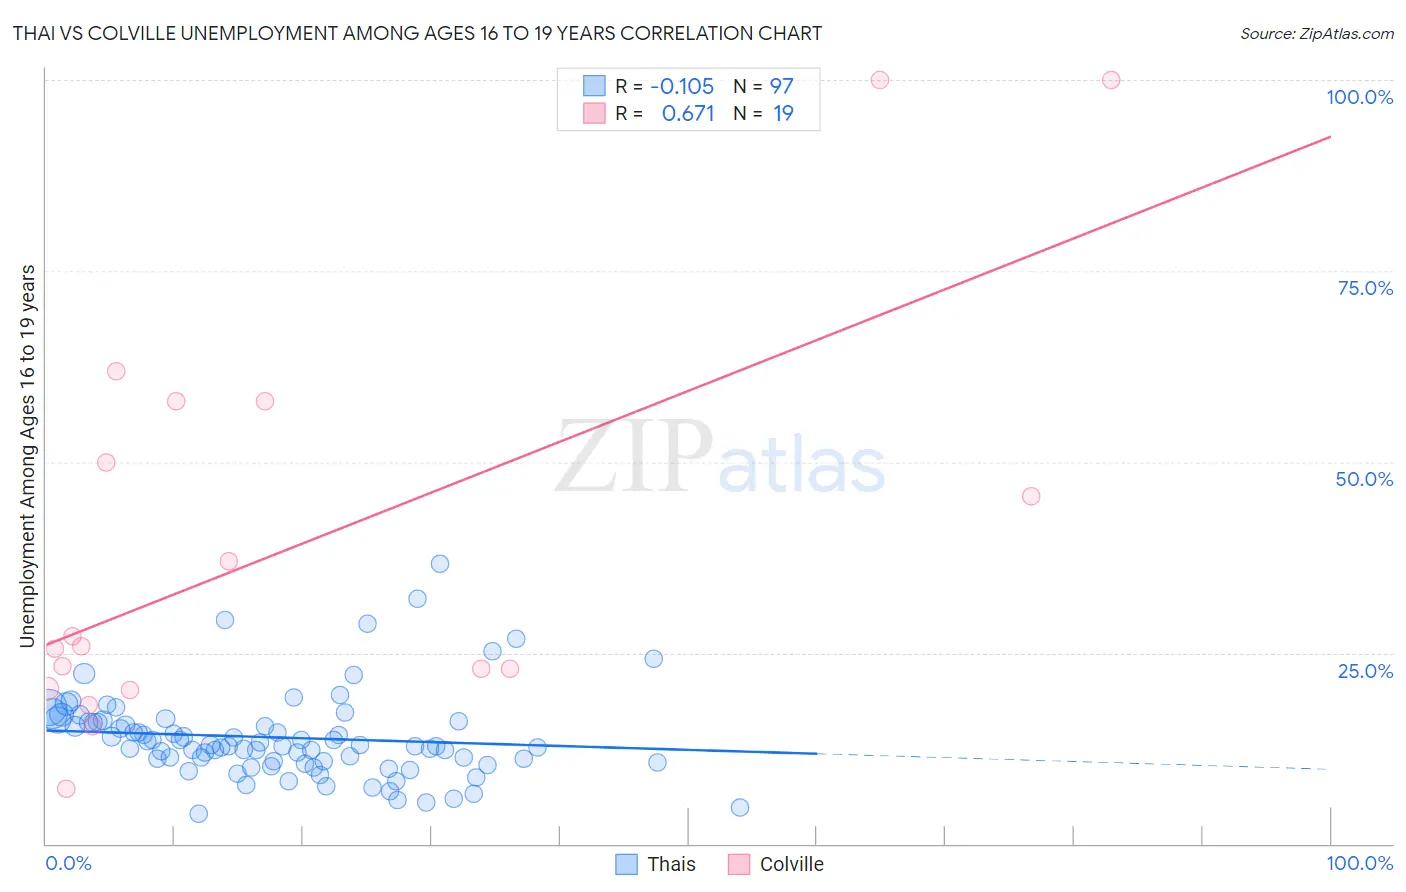 Thai vs Colville Unemployment Among Ages 16 to 19 years